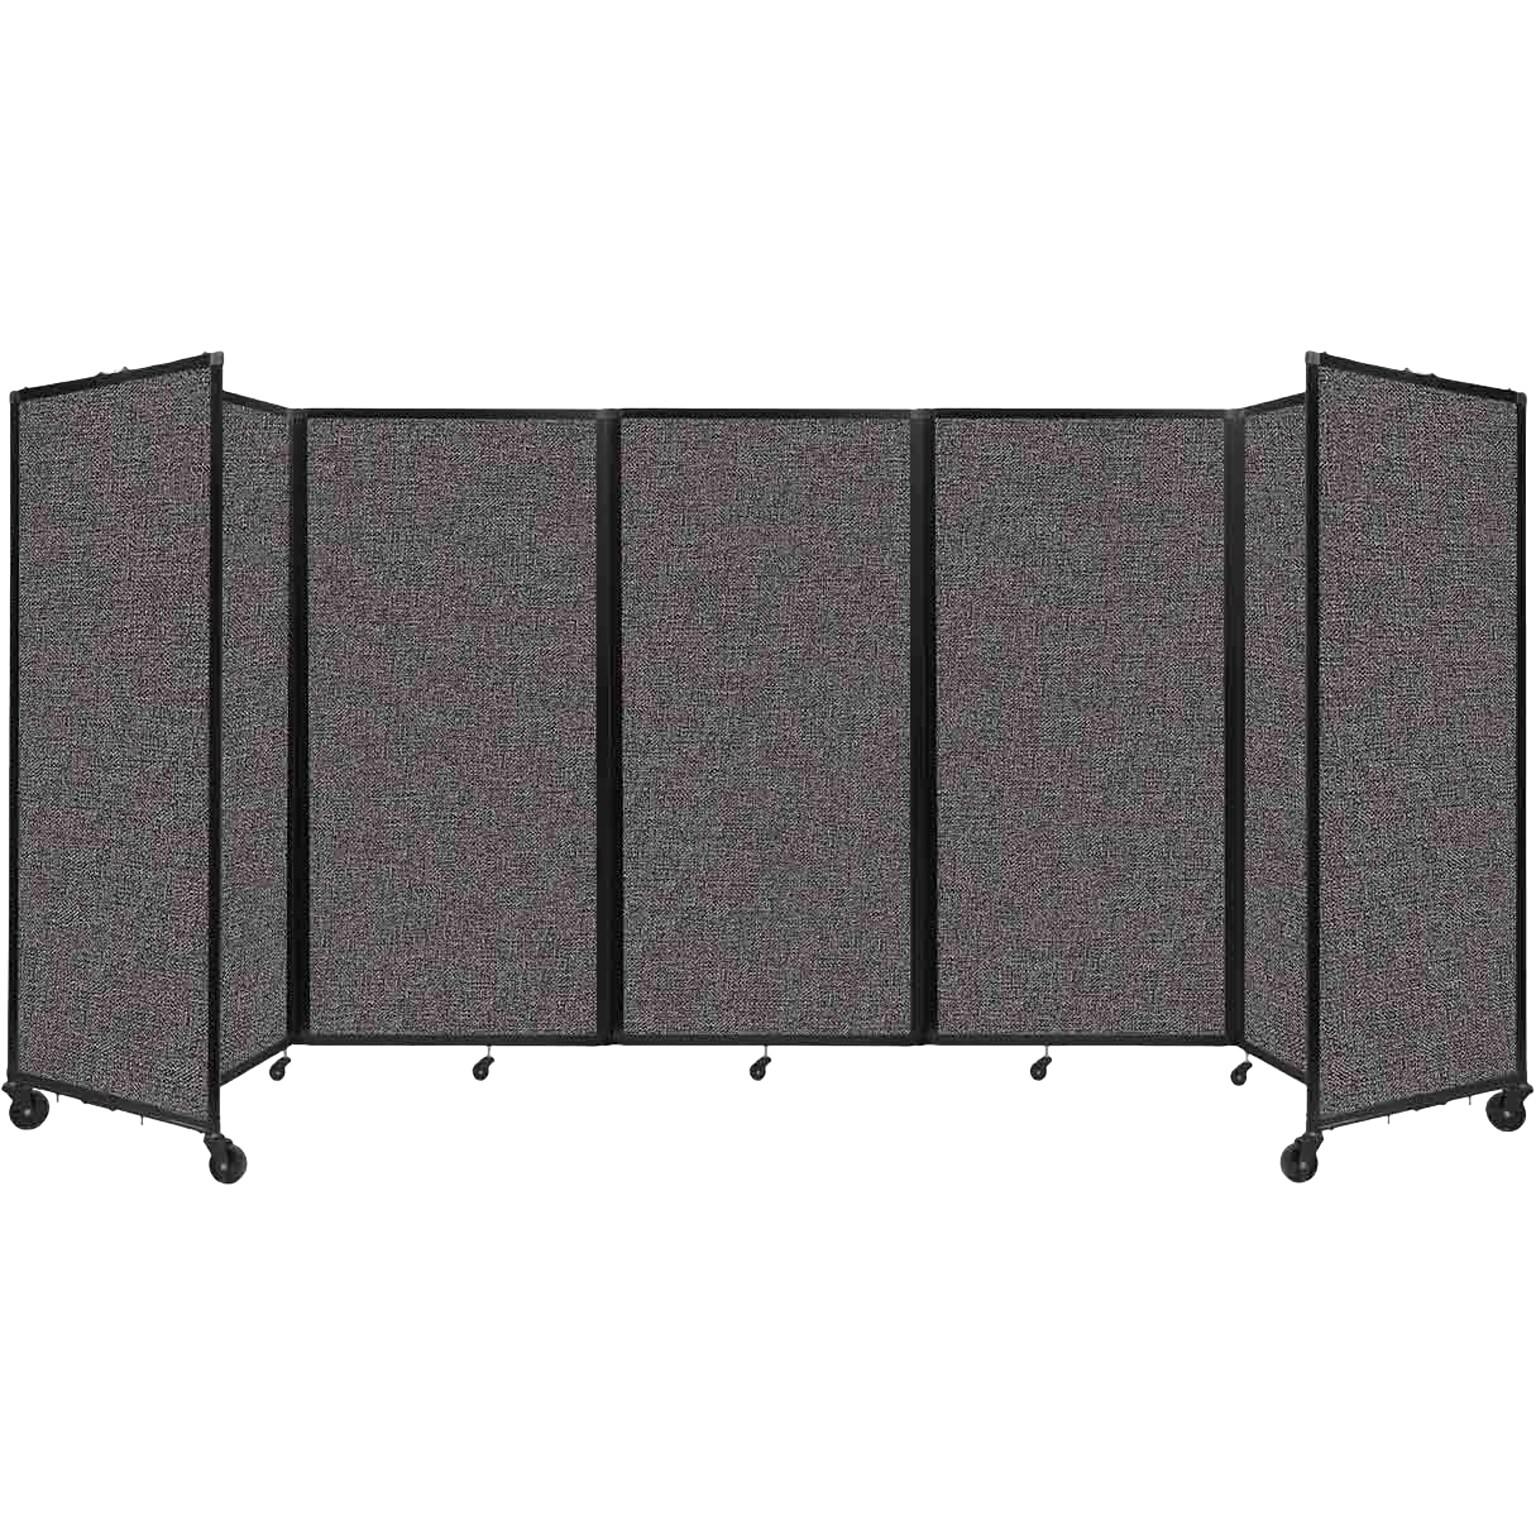 Versare The Room Divider 360 Freestanding Mobile Partition, 72H x 168W, Charcoal Gray Fabric (1172507)